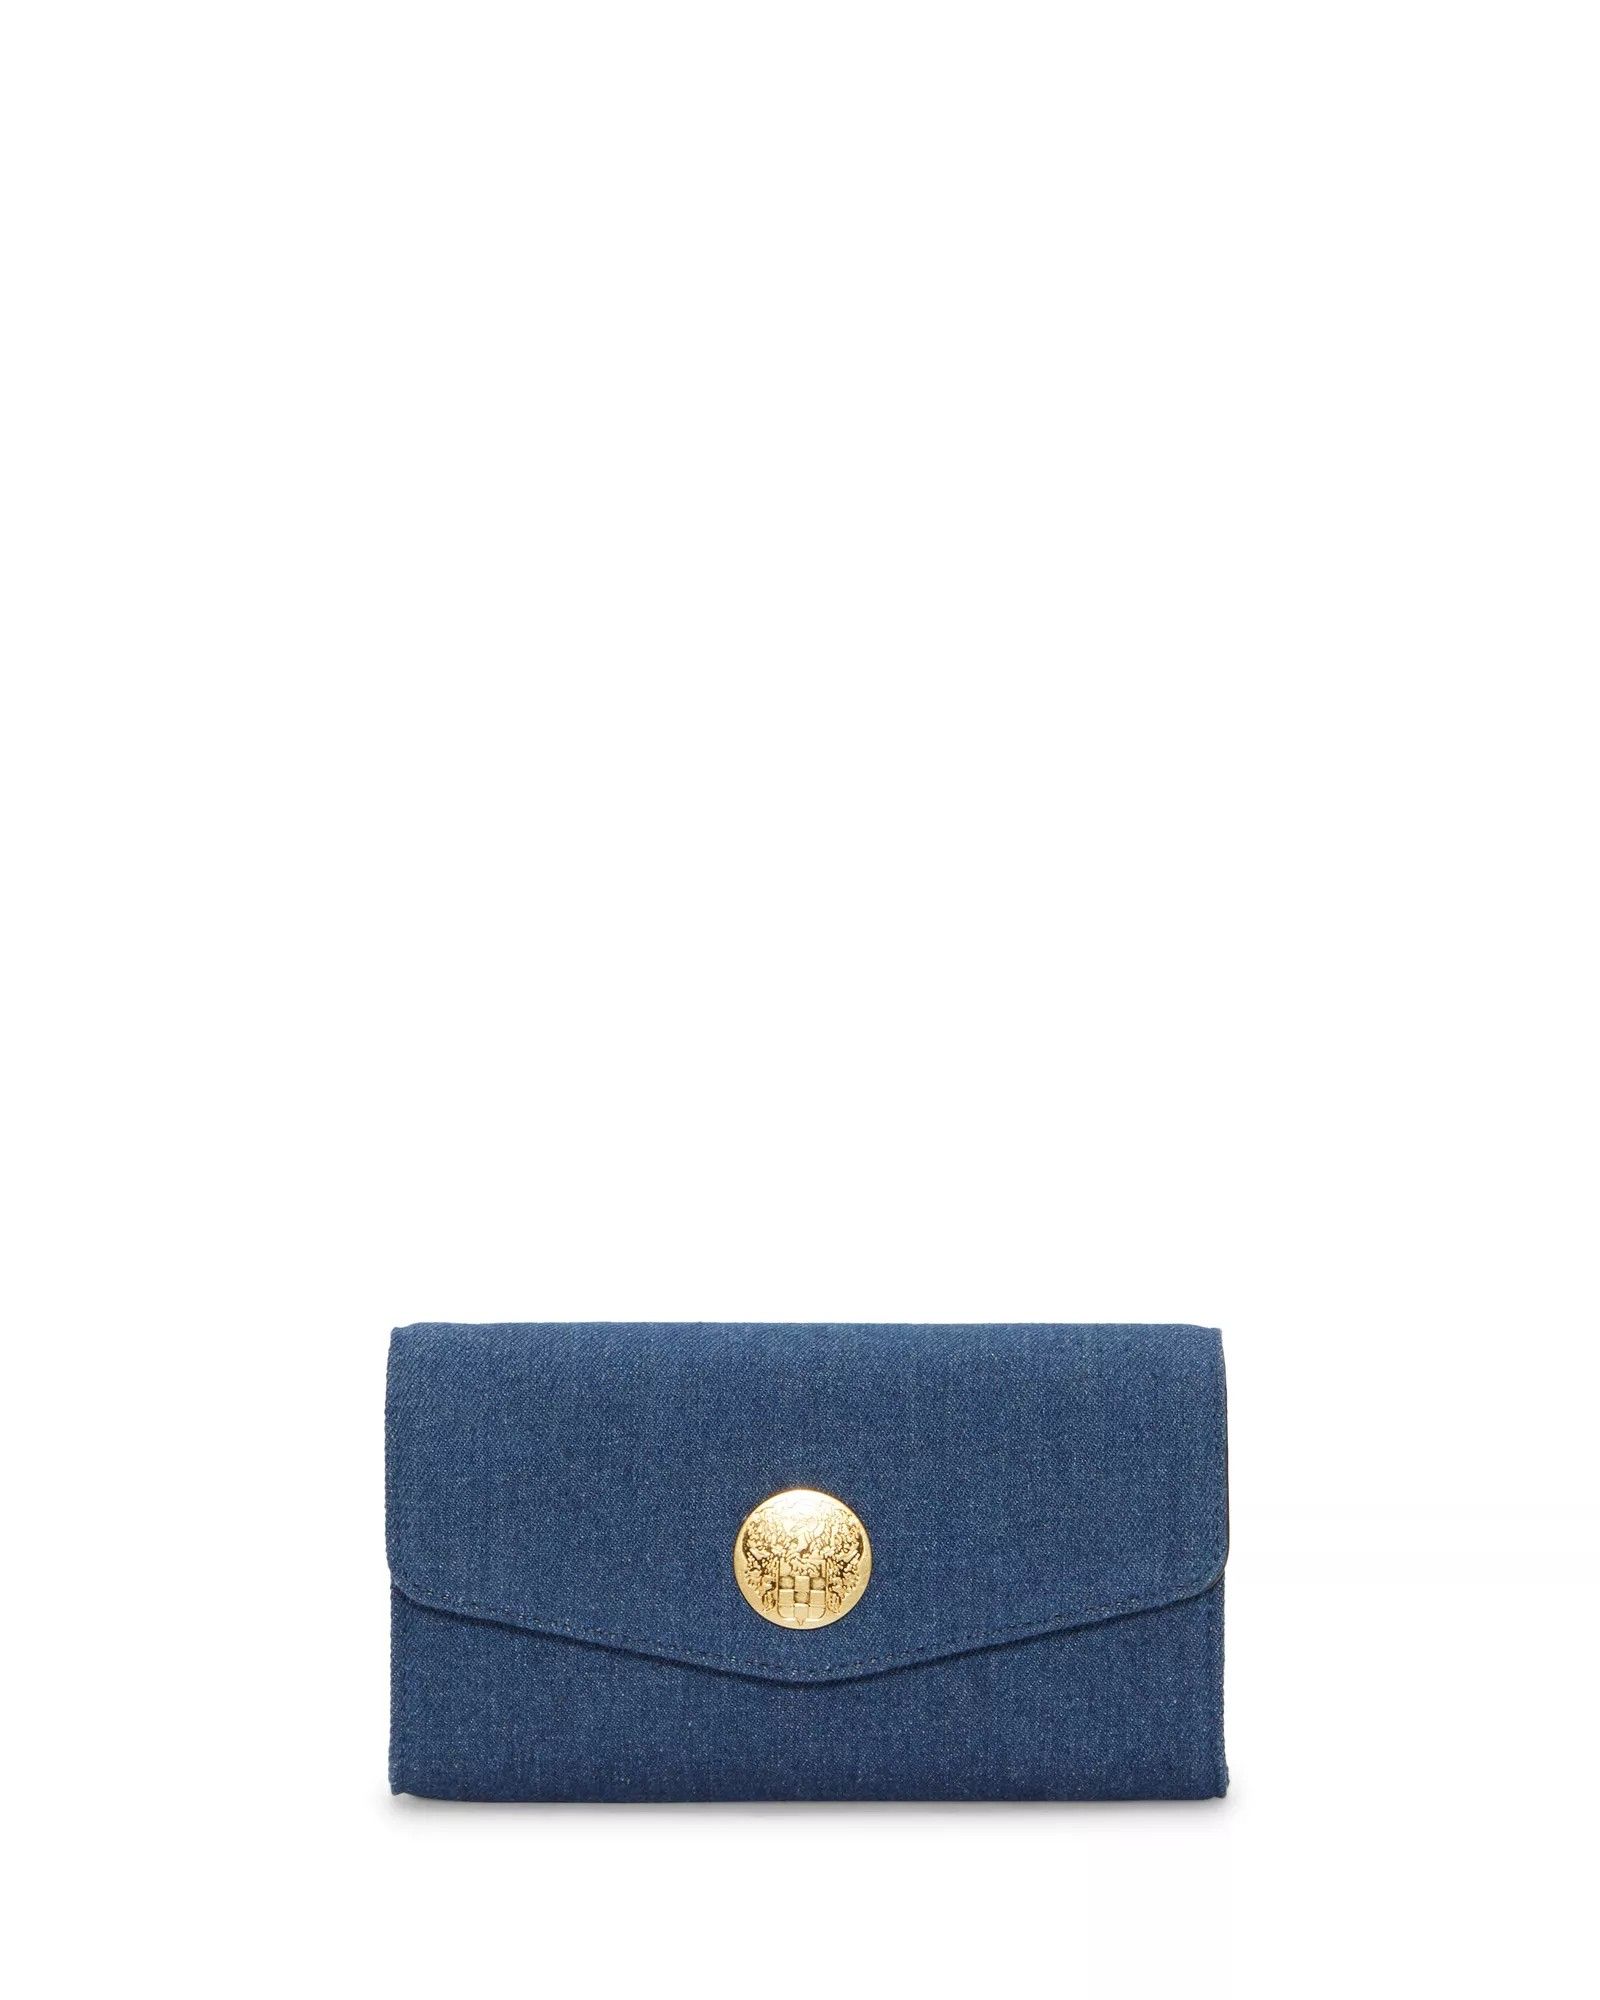 Vince Camuto Kisho Denim Wallet on a Chain | Vince Camuto